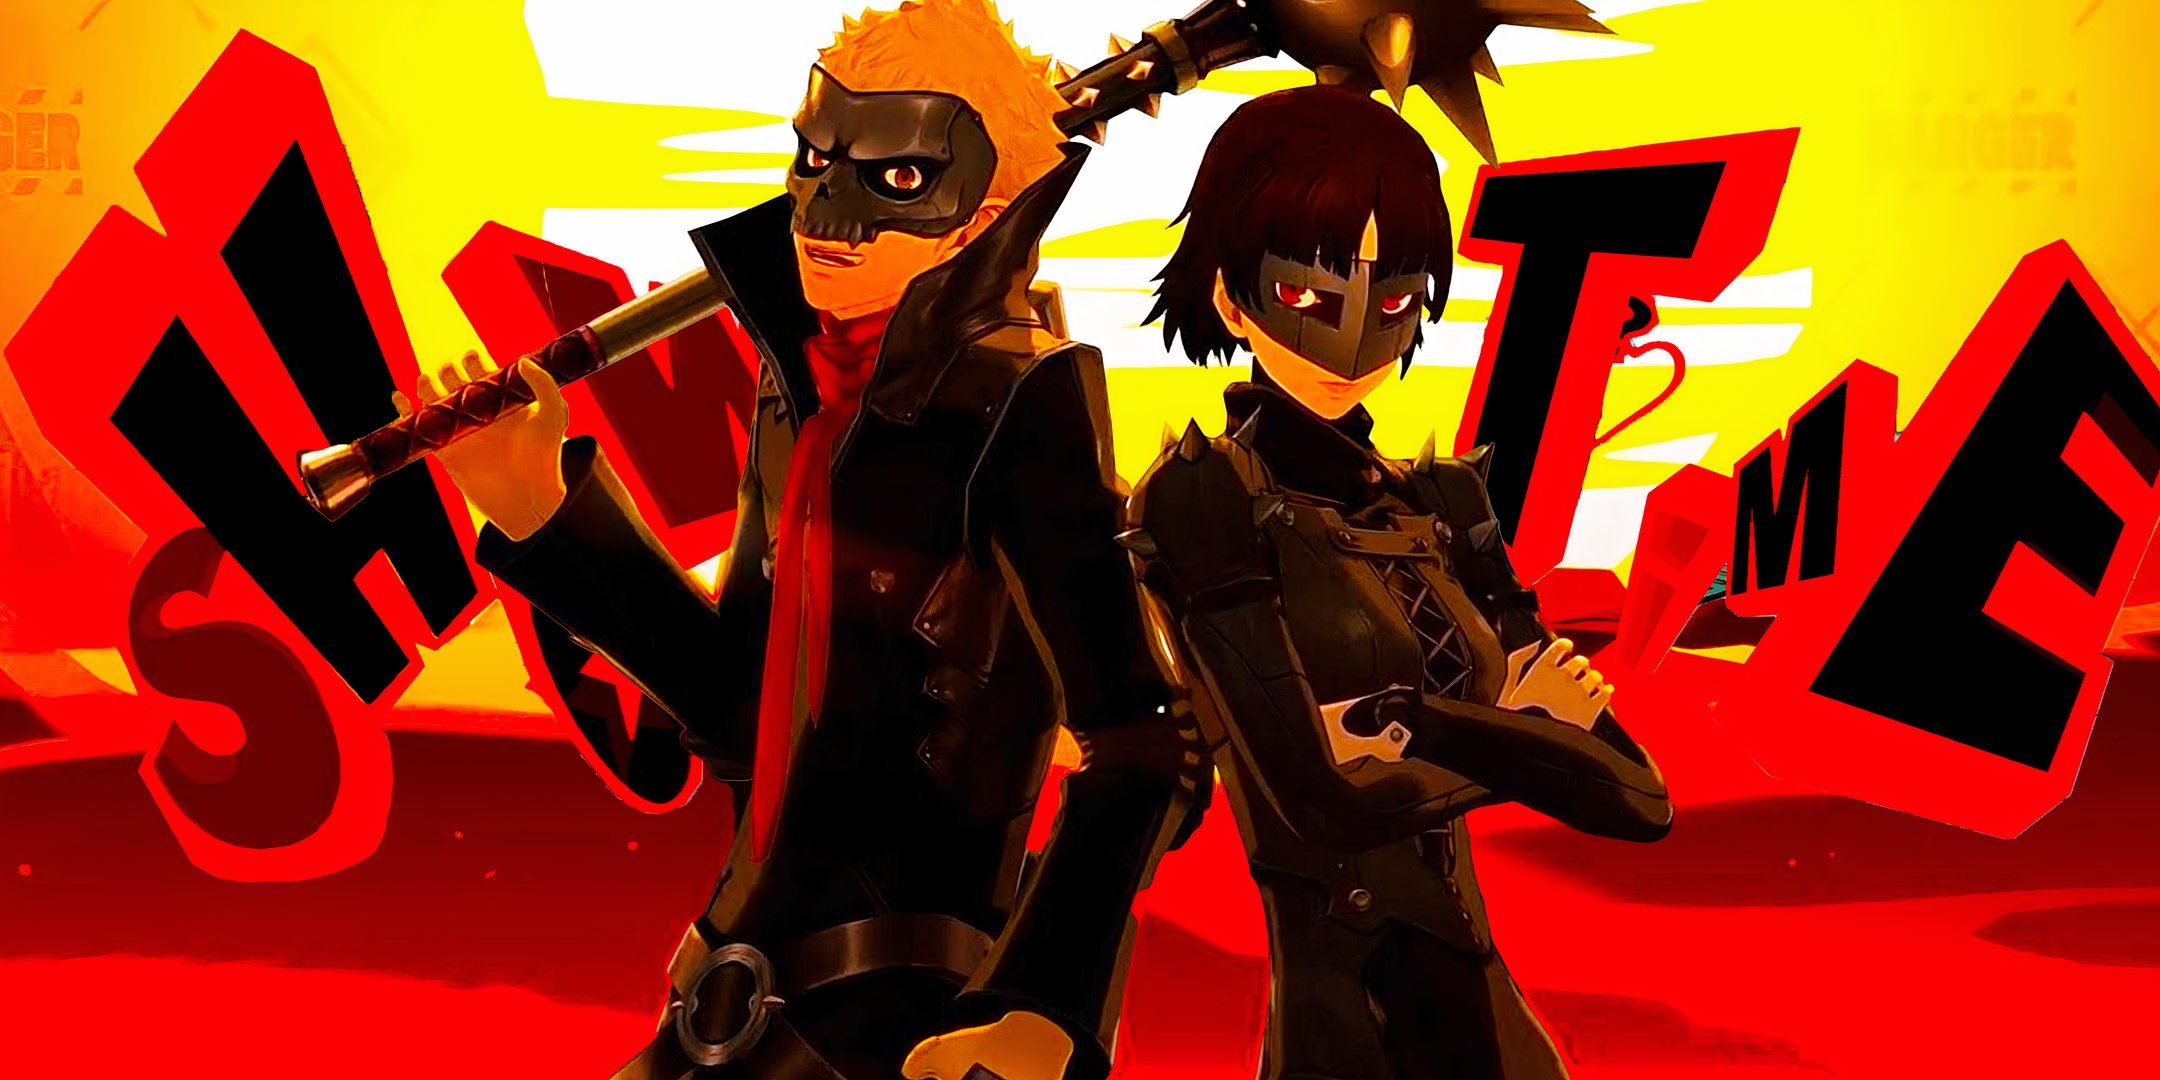 Persona 5 Royal: How To Unlock Showtime Attacks